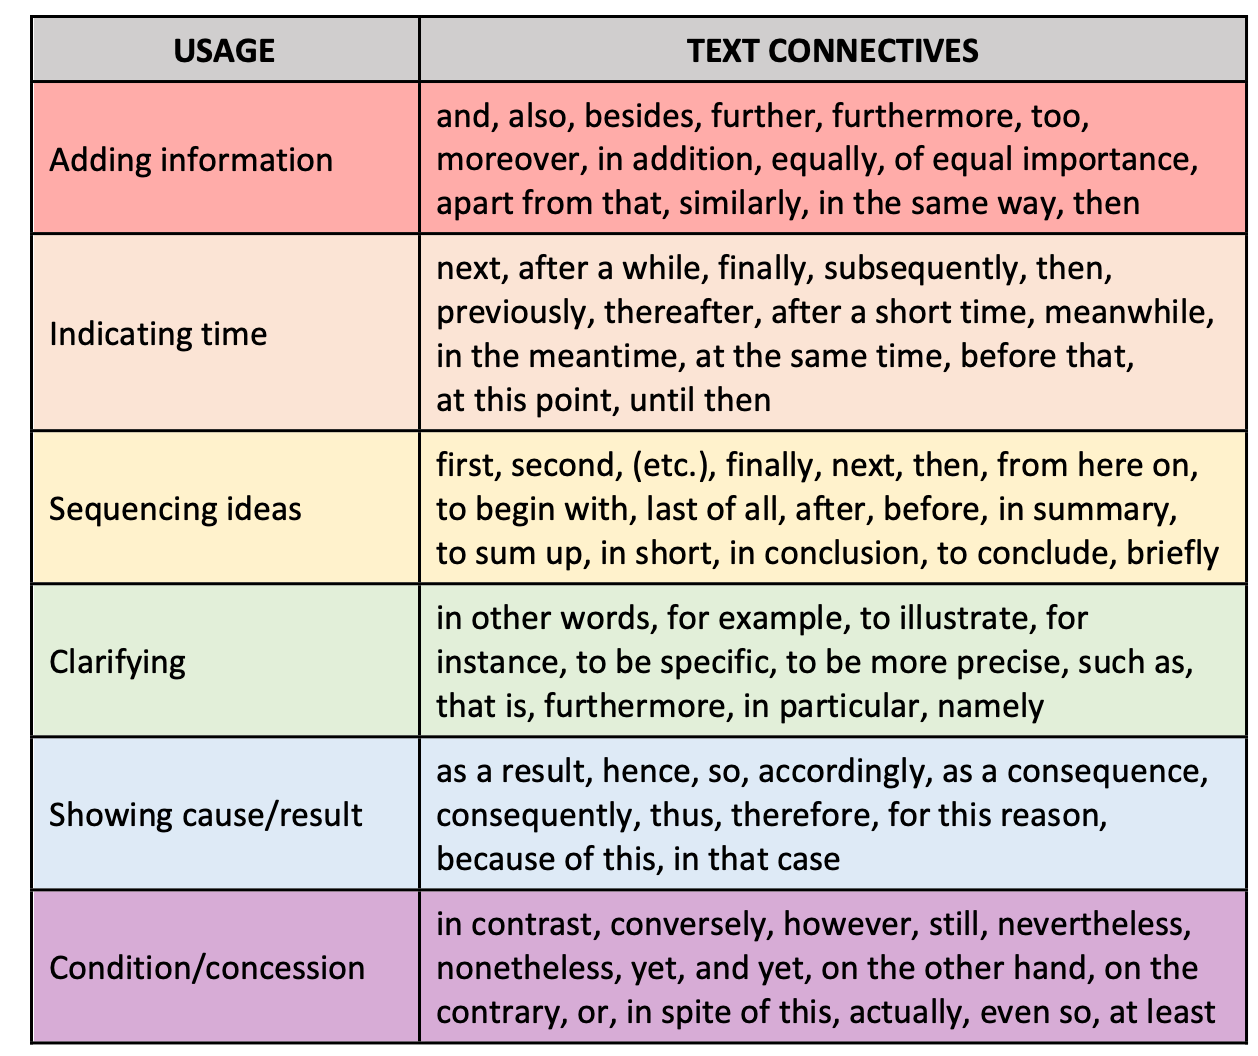 a table listing text connectives based on their purpose or usage. The six uses of connectives are to: add information, indicate time, sequence ideas, clarify, show cause or result, state condition or concession